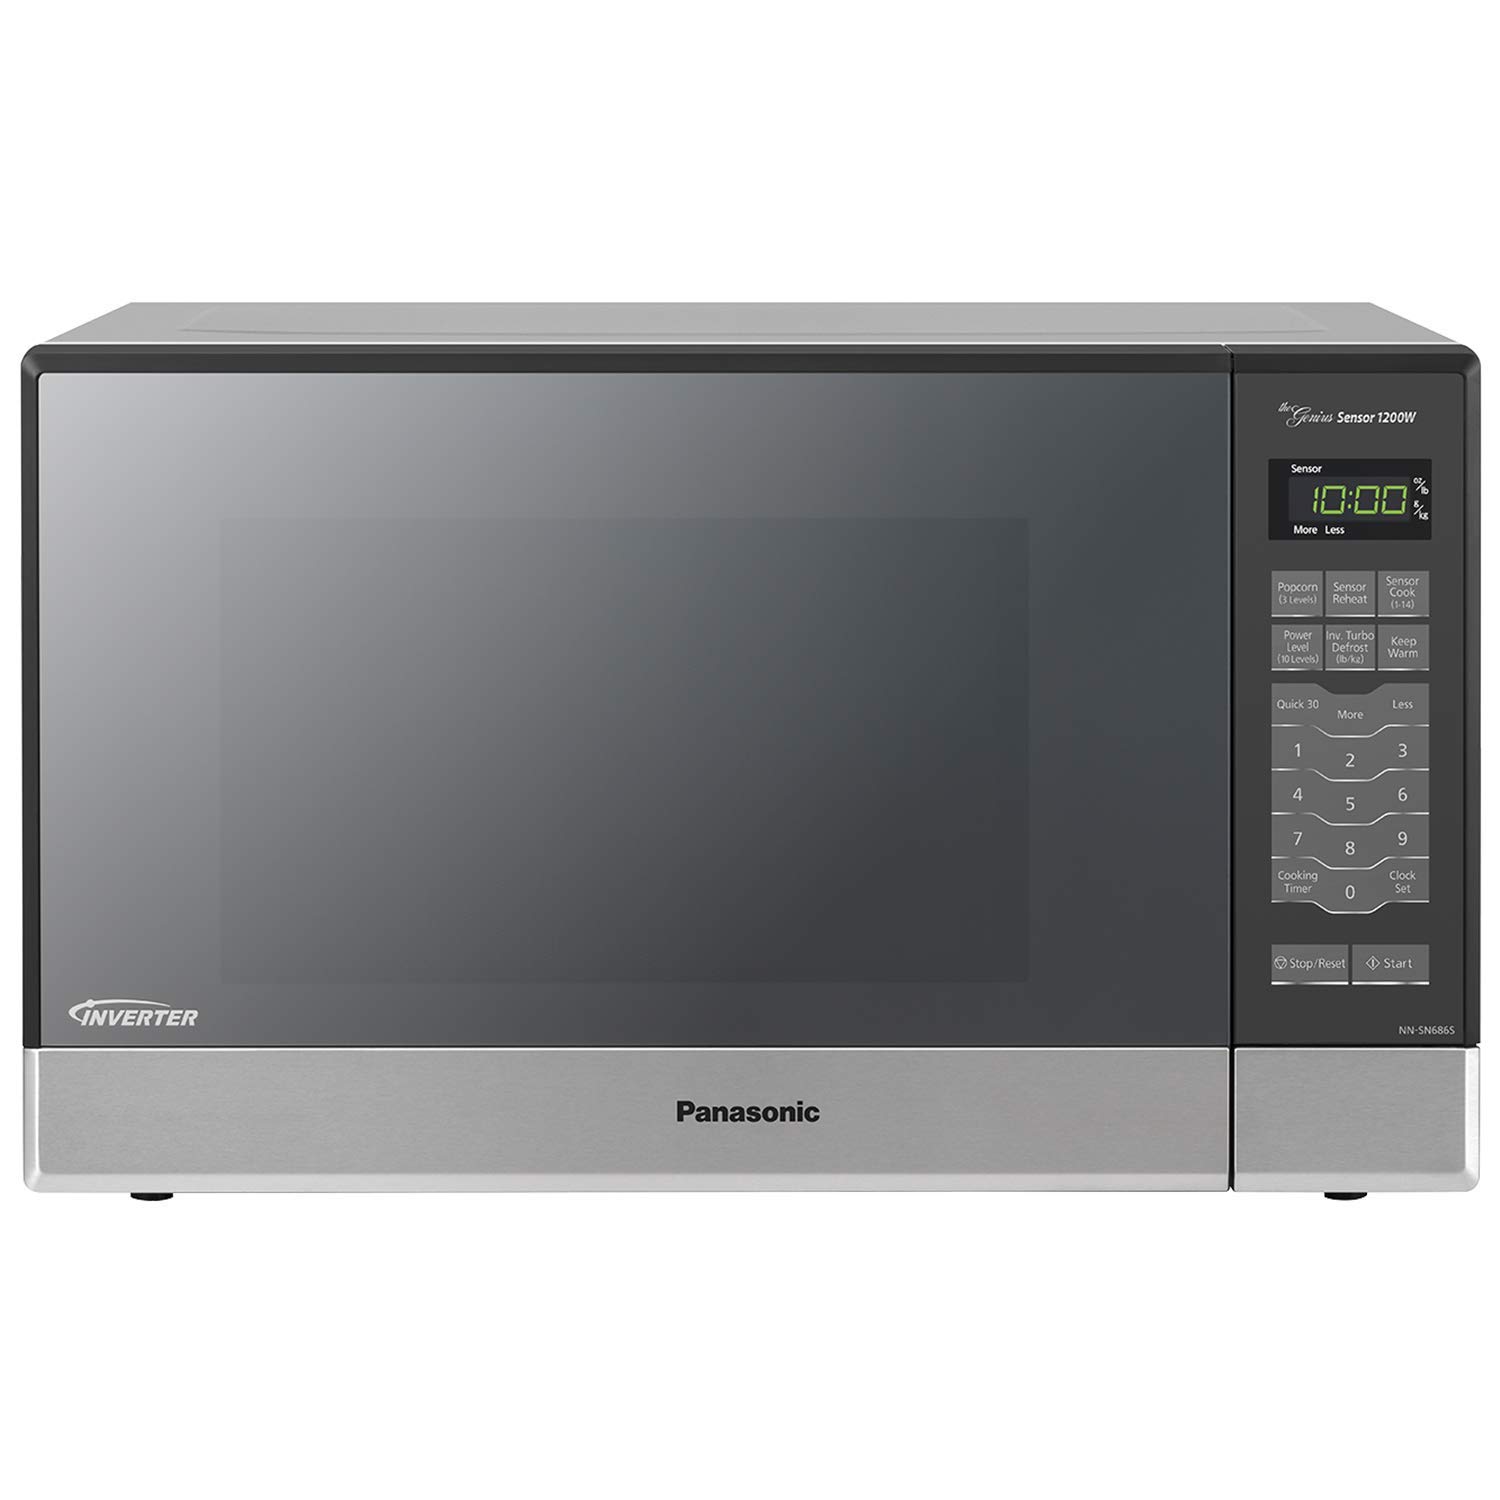 Best Microwave Oven for Baking and Grilling 2020 | Top 5 Ovens